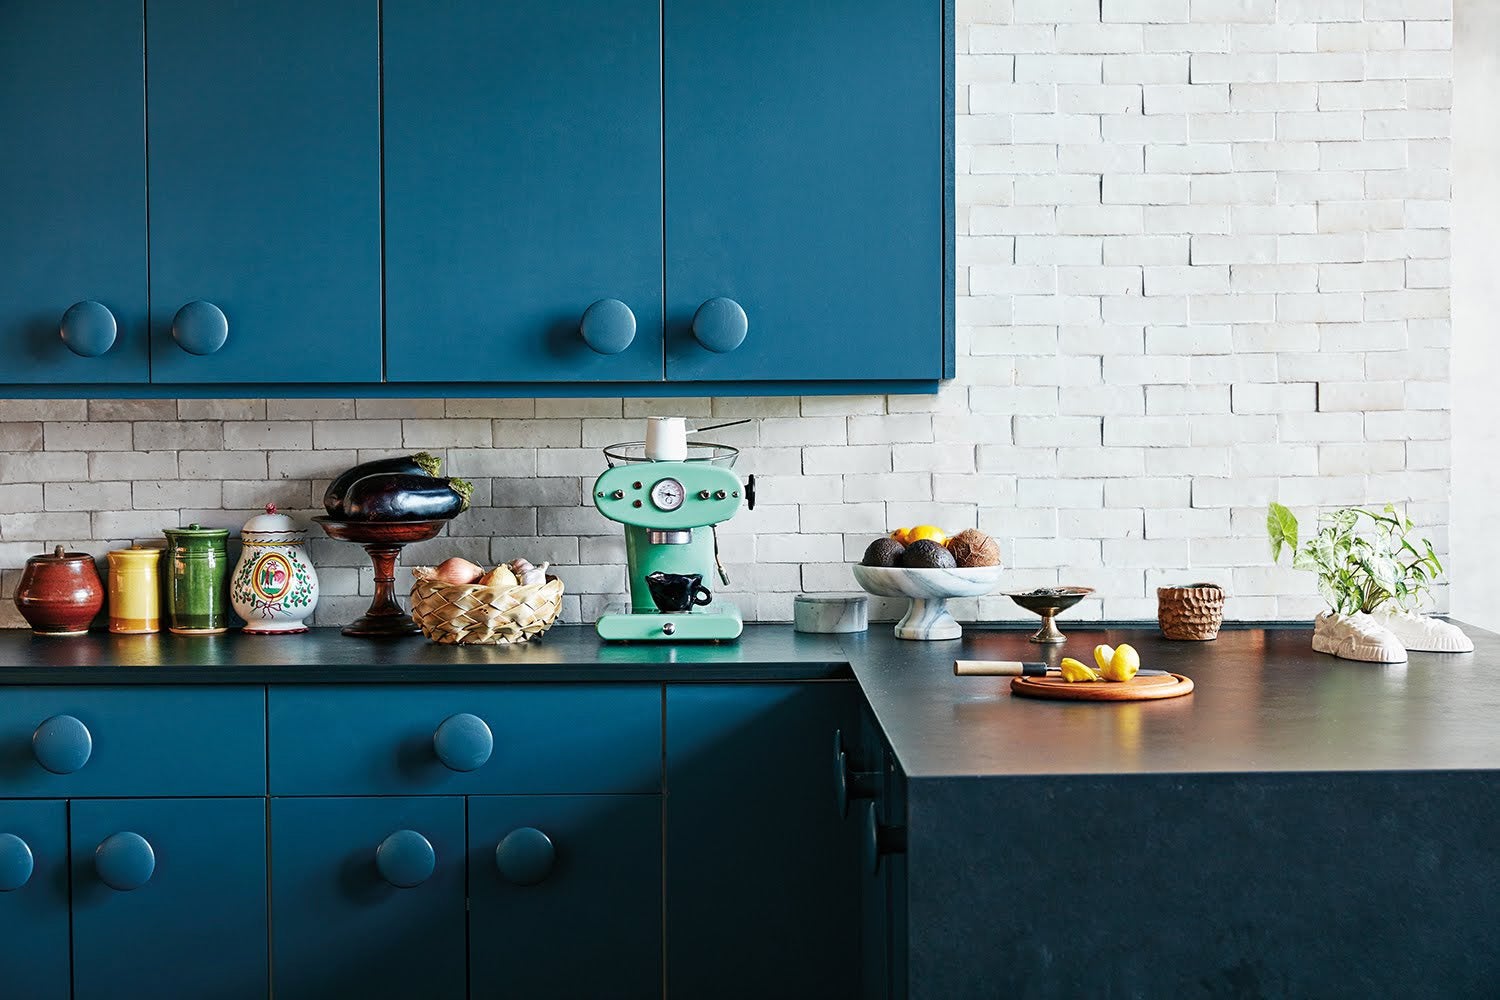 Hands Down: The 15 Best Blue Paint Colors for Kitchen Cabinets